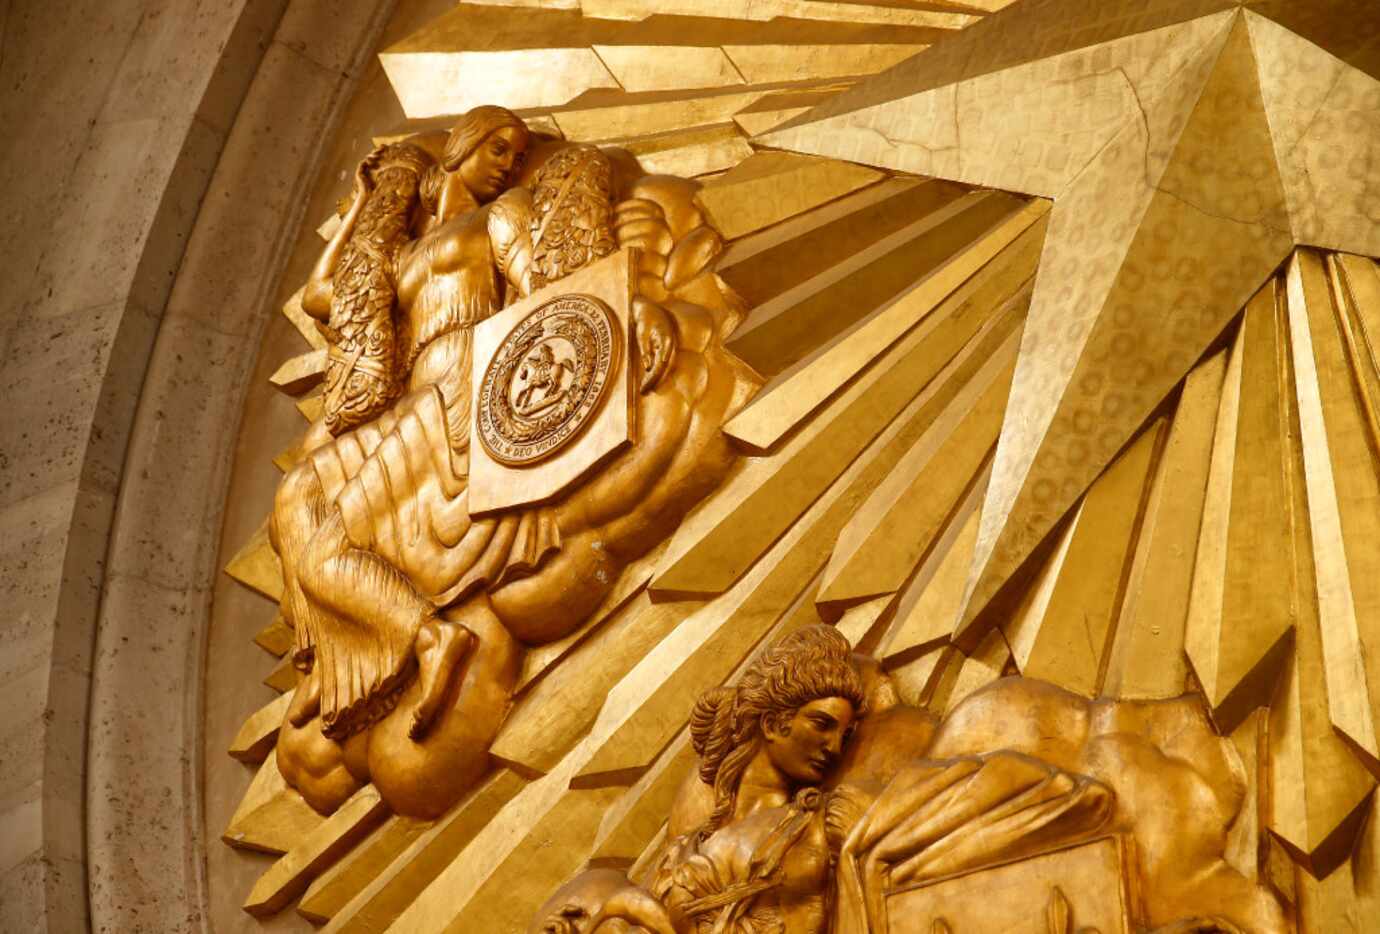 Part of Fair Park's Hall of State gold-leafed medallion represents the Confederacy as part...